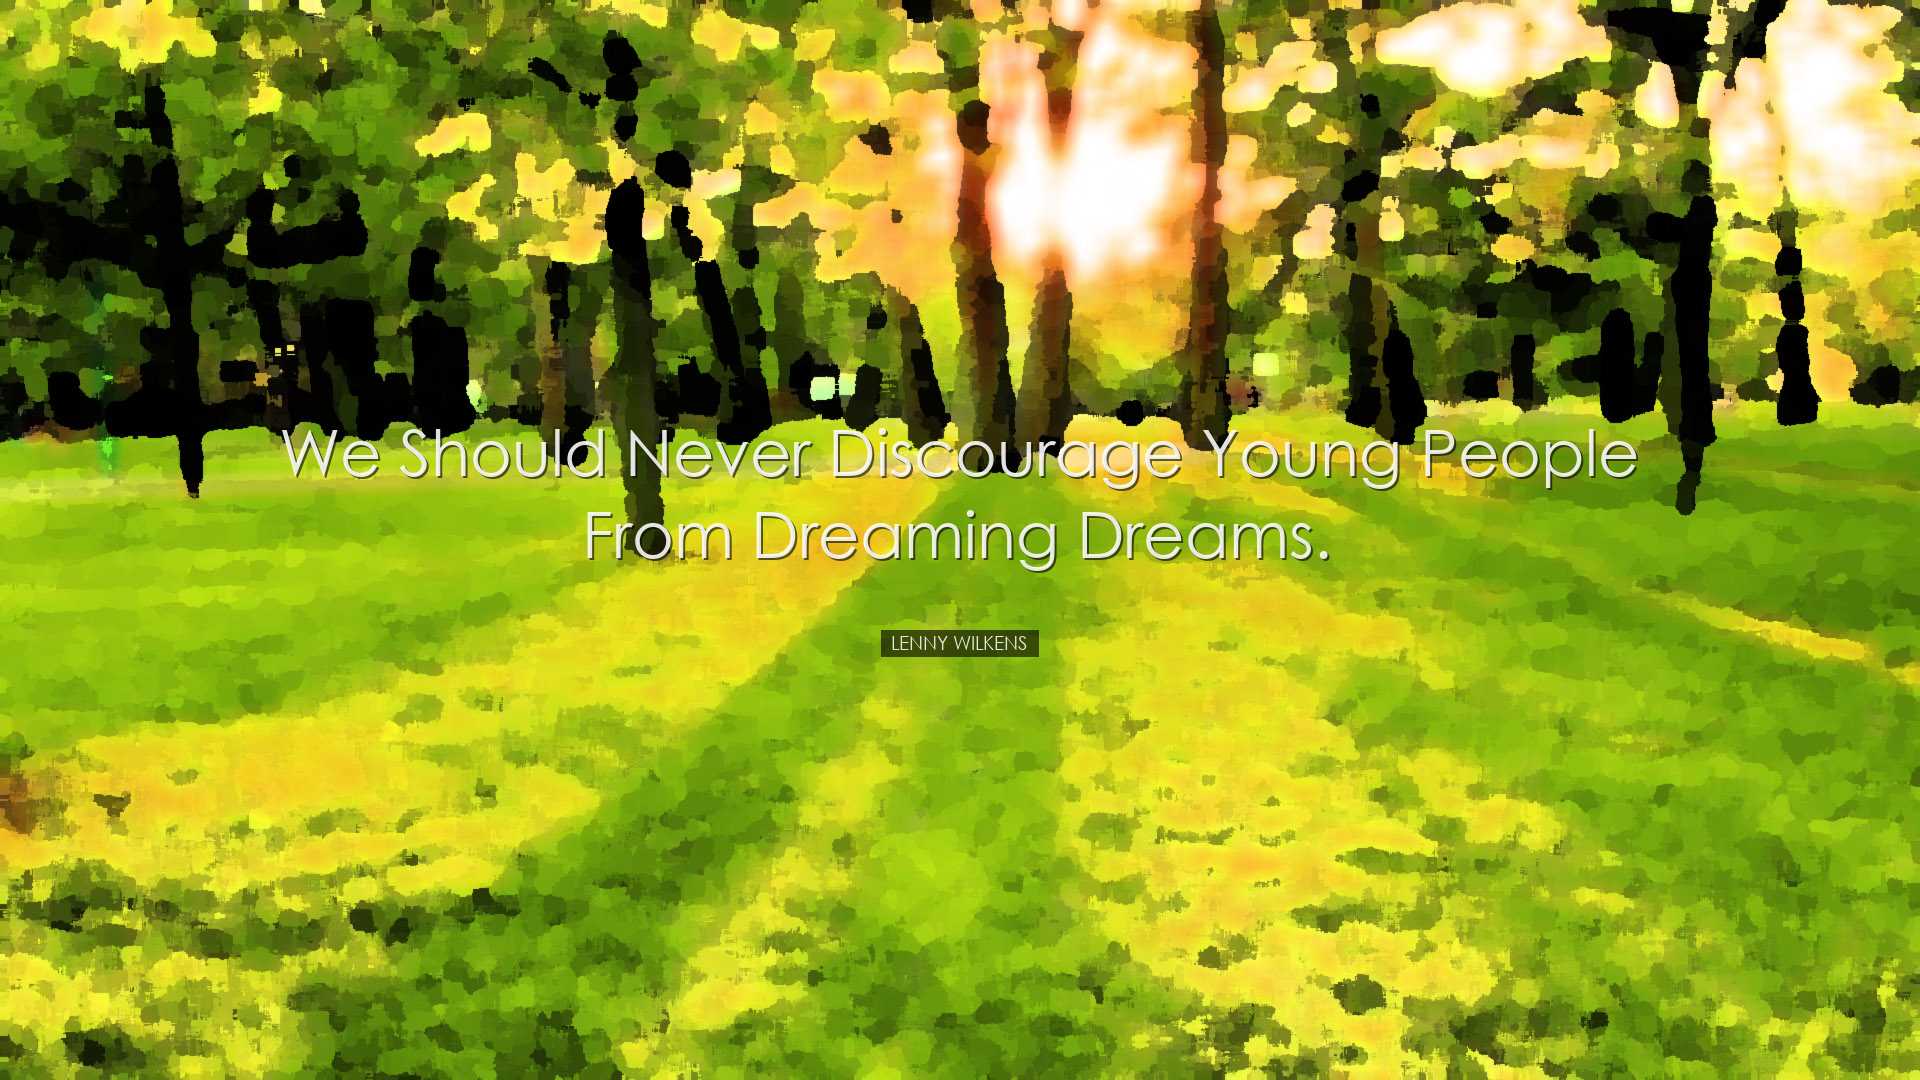 We should never discourage young people from dreaming dreams. - Le